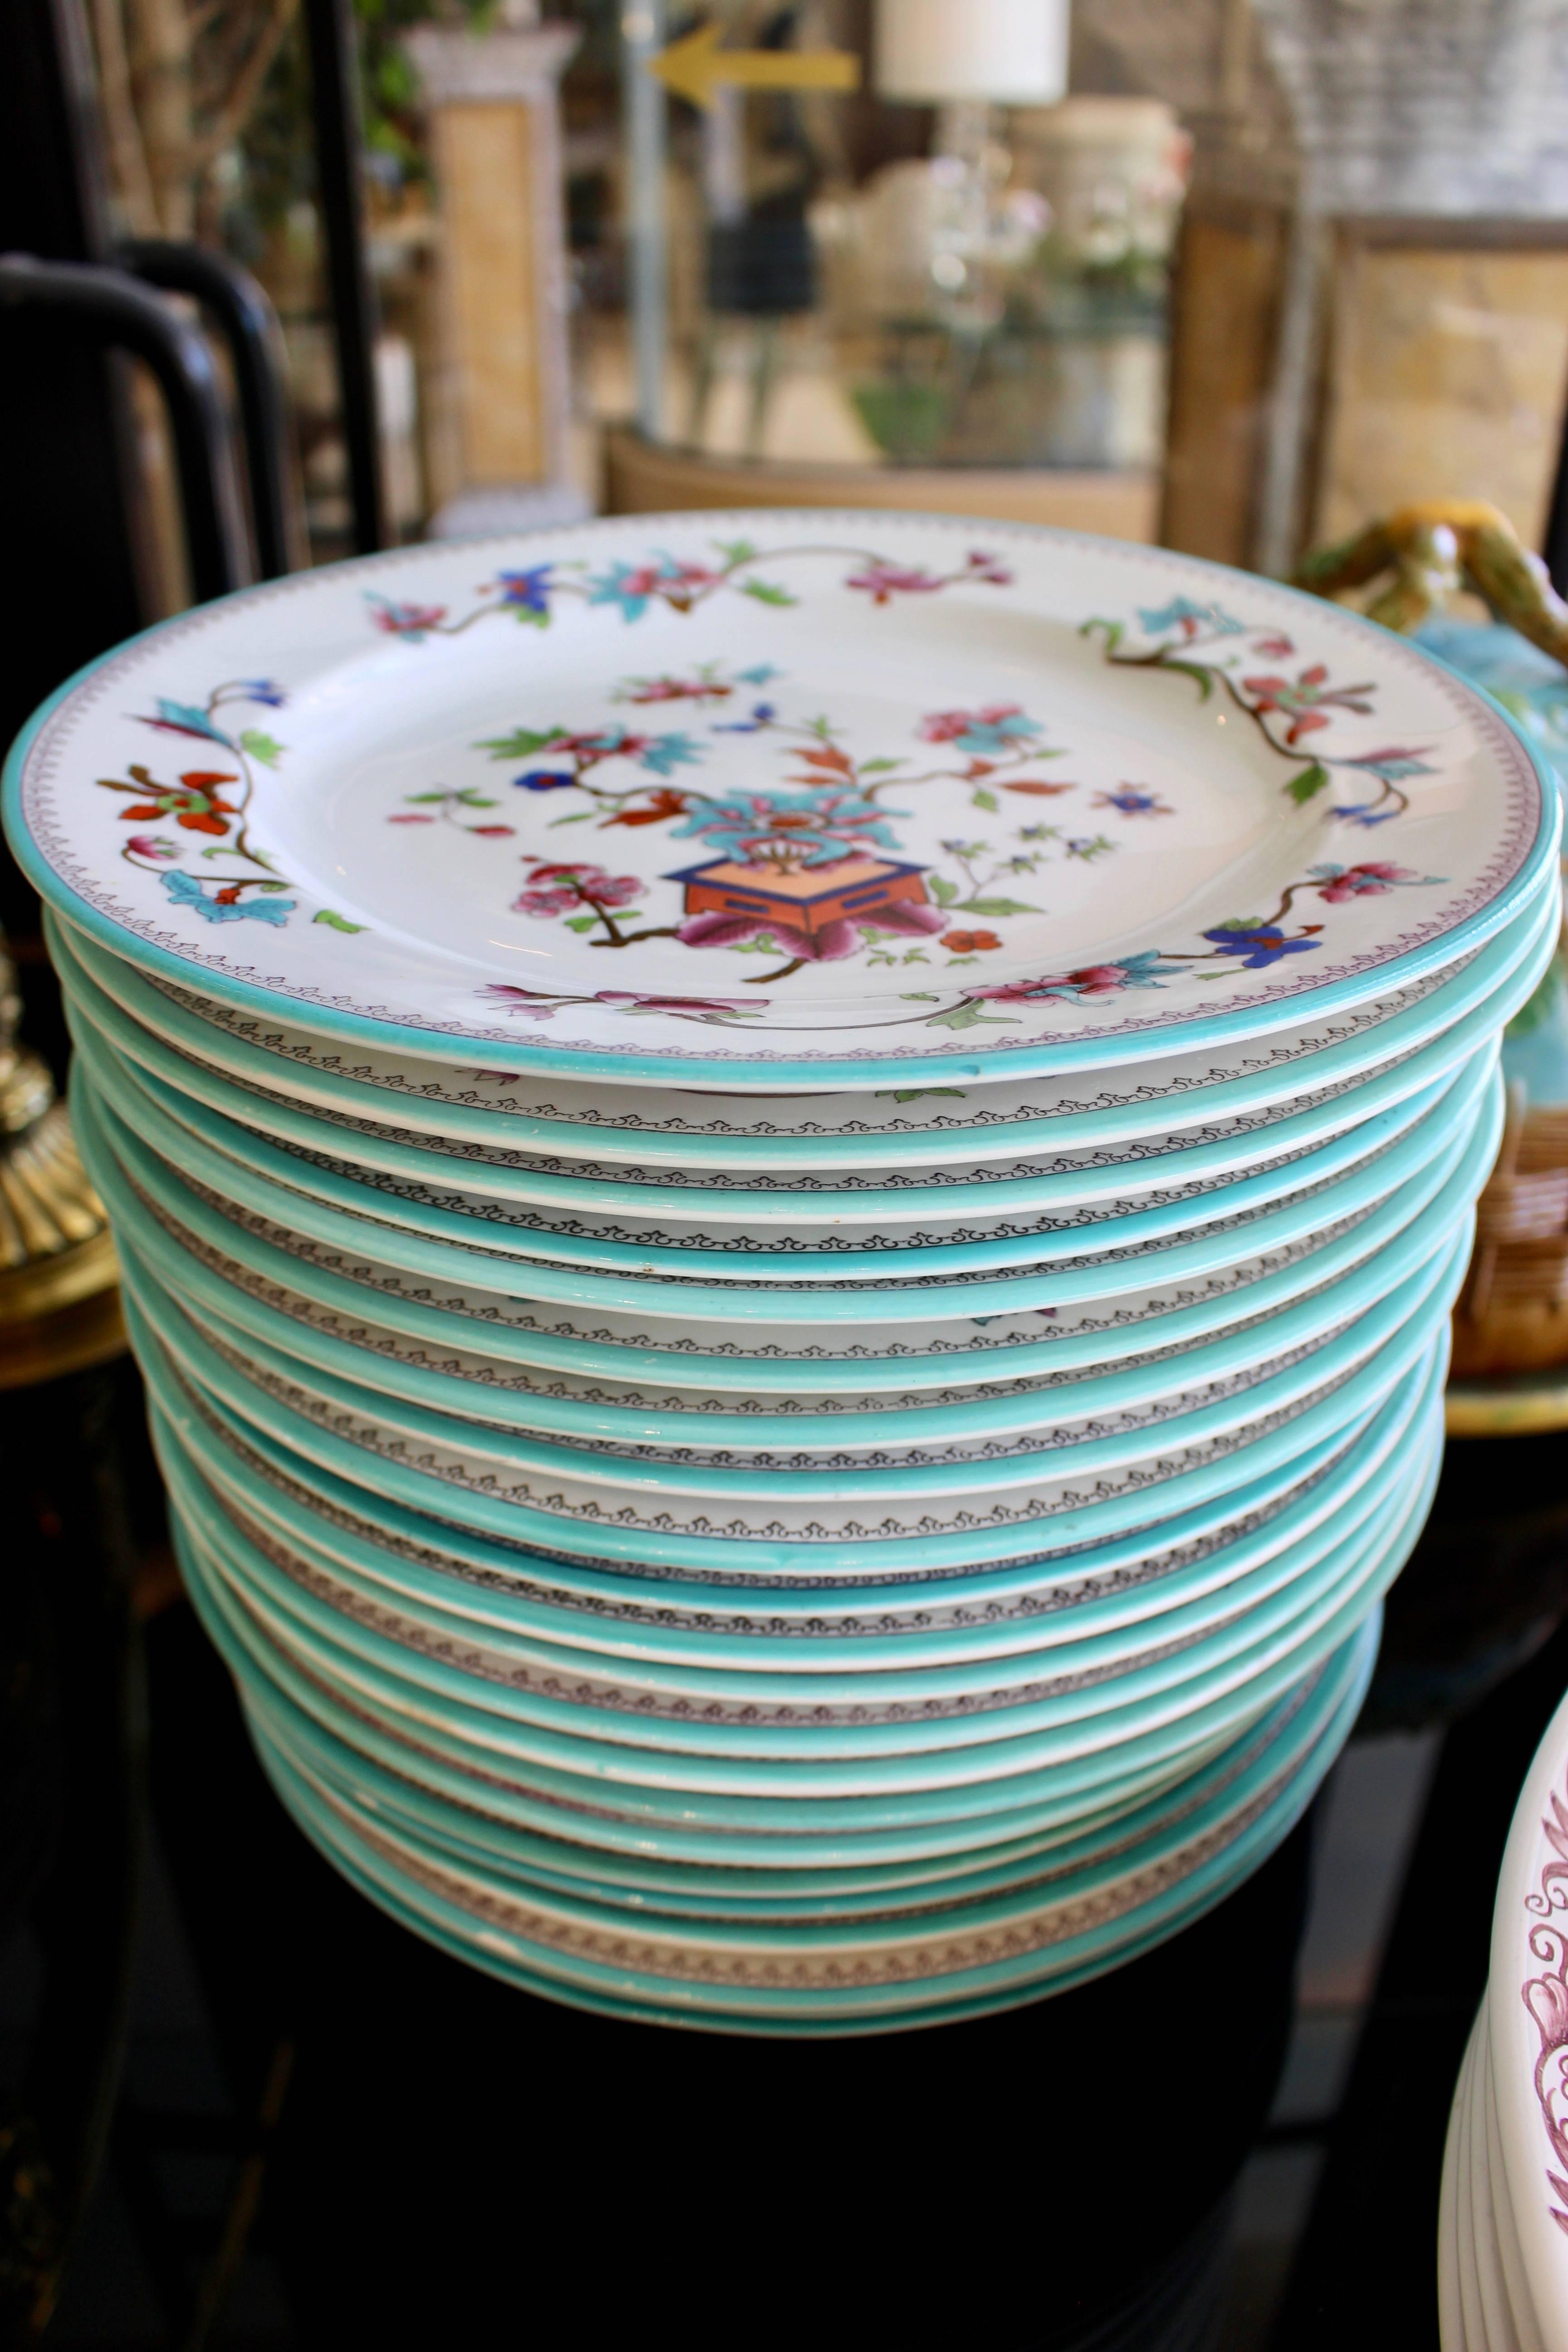 Set of 22 English porcelain hand-painted floral plates. Measuring 10